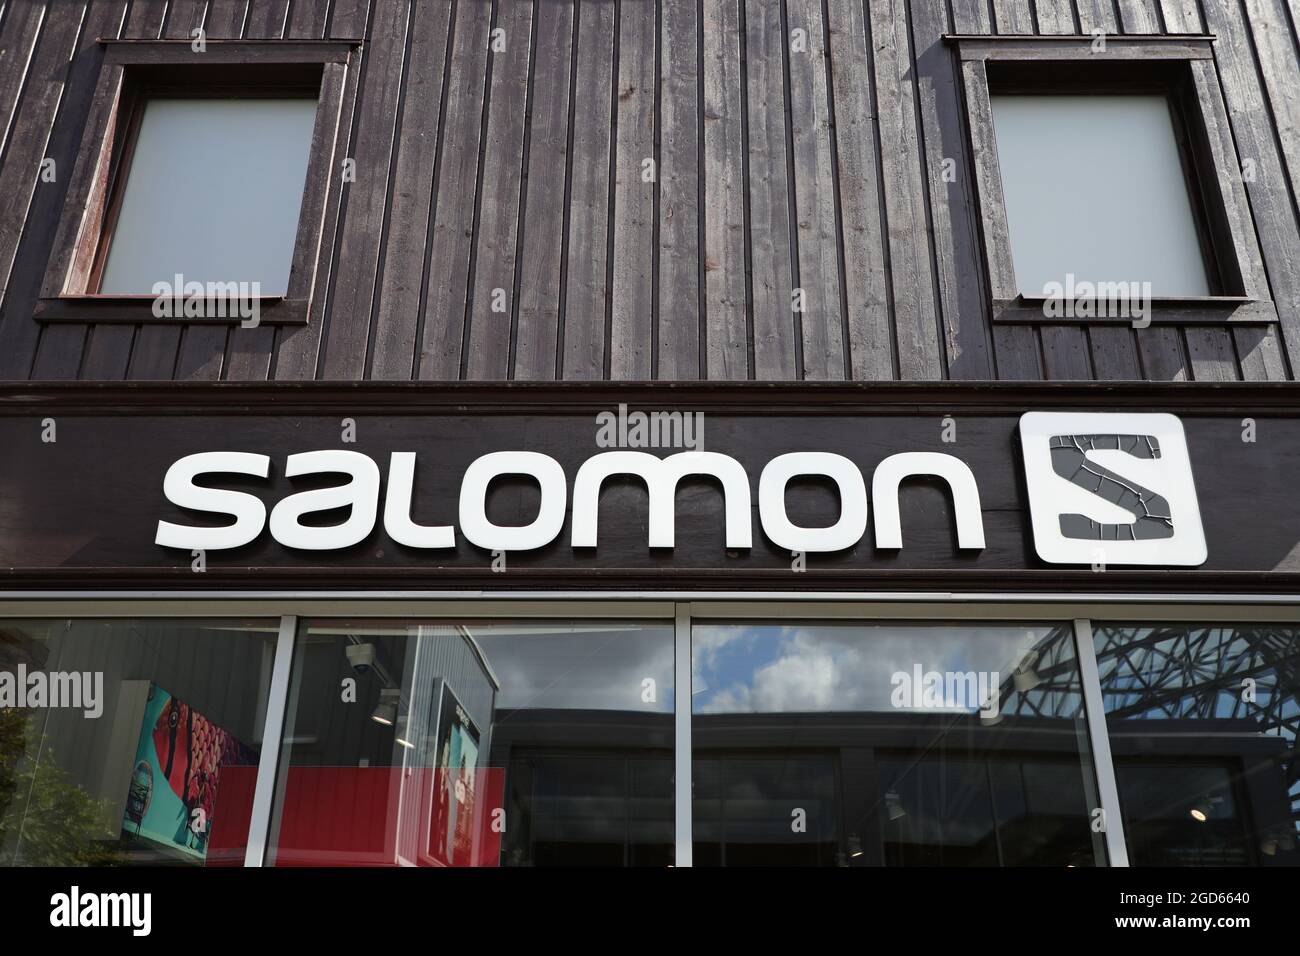 Salomon sign at Hede Fashion Outlet Stock Photo - Alamy